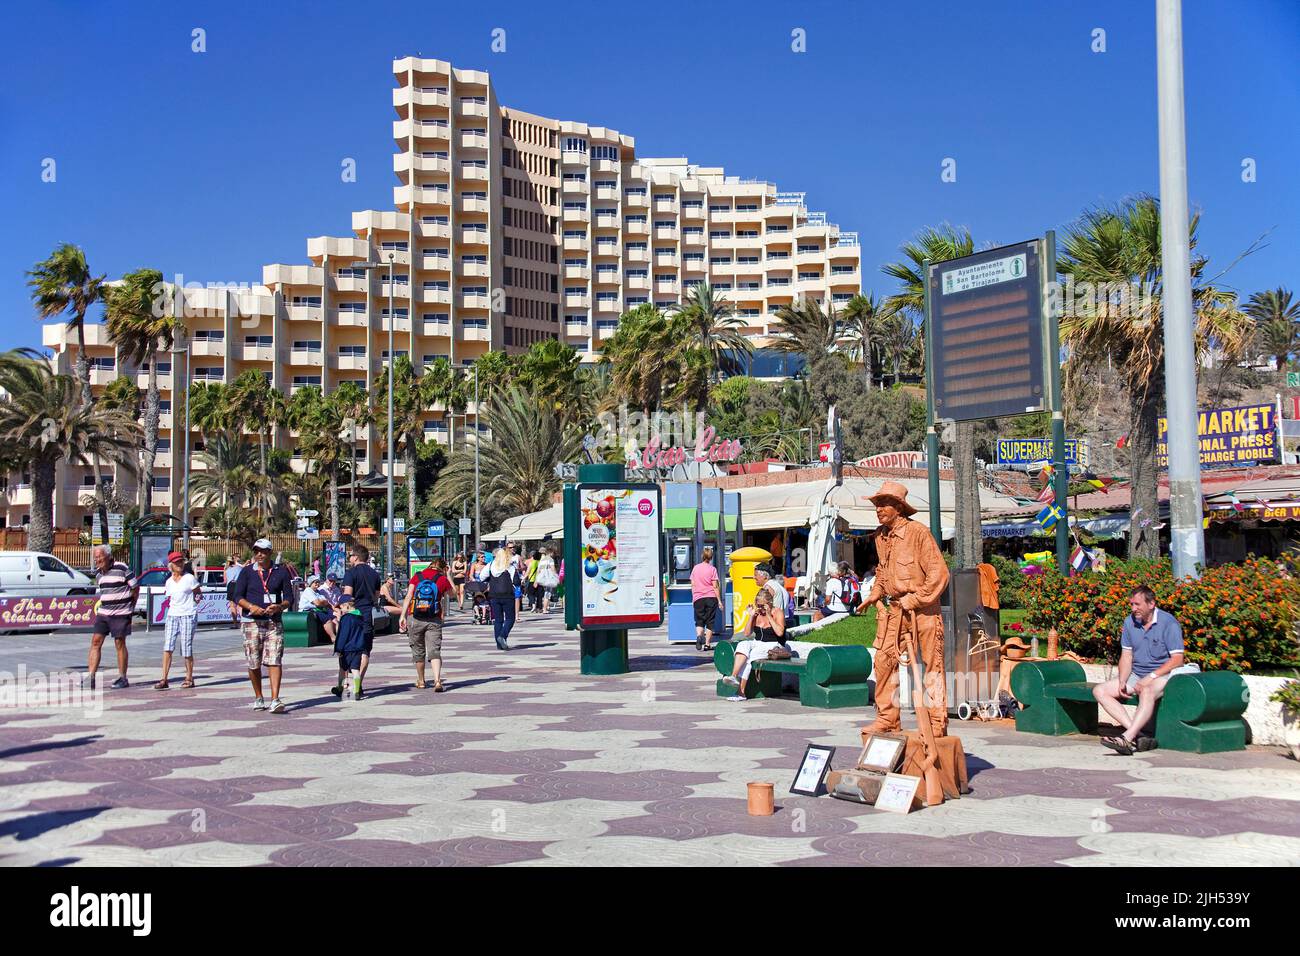 Human statue, street performer at the promenade of Playa del Ingles, Grand Canary, Canary islands, Spain, Europe Stock Photo